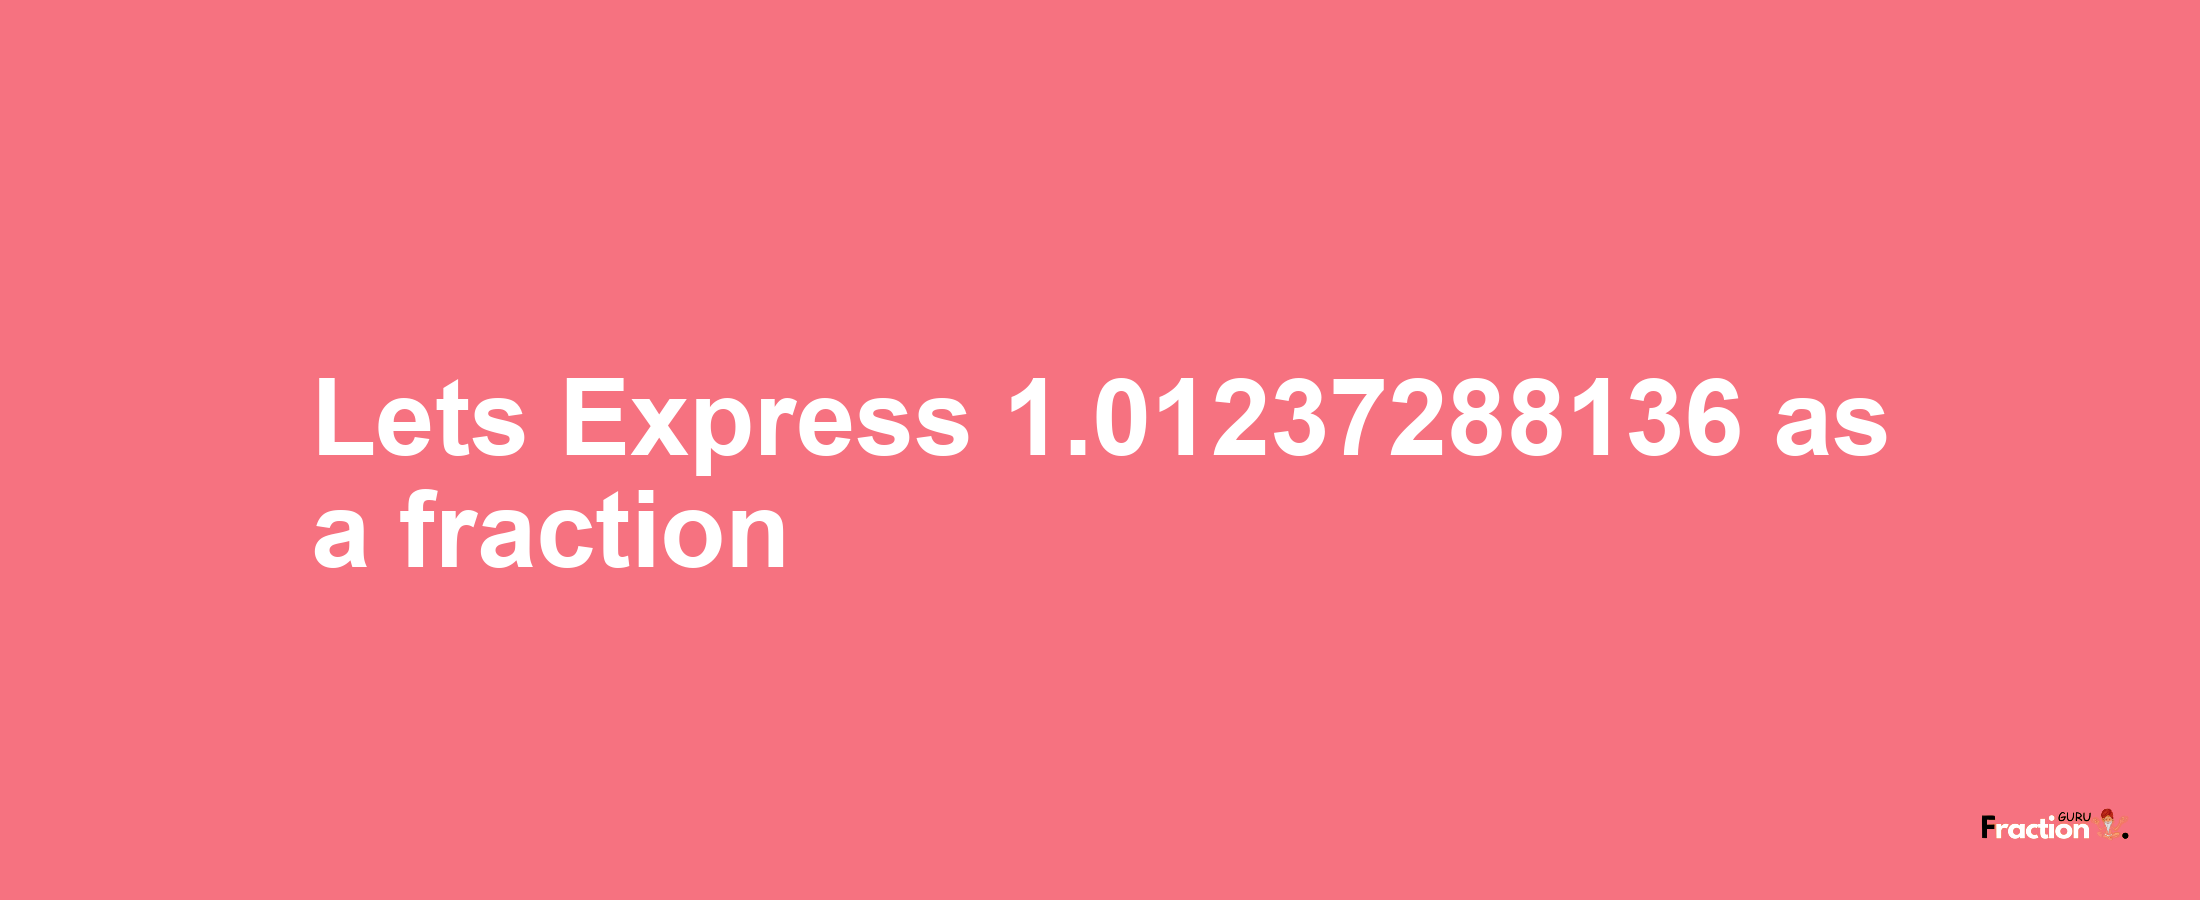 Lets Express 1.01237288136 as afraction